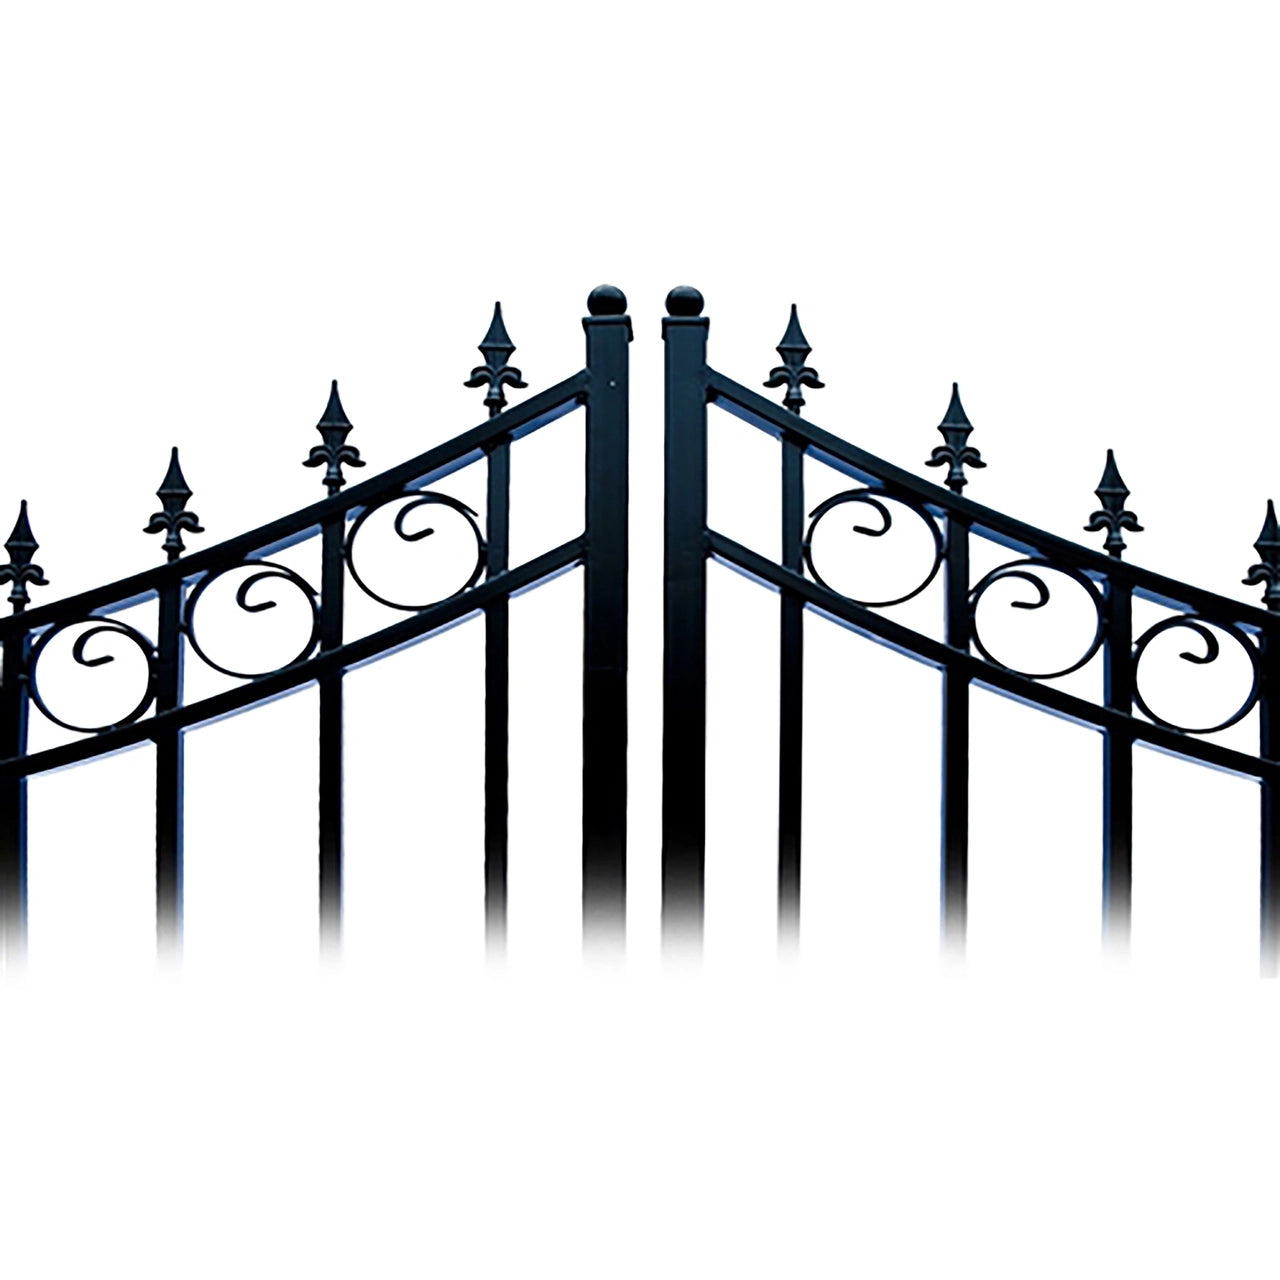 Aleko Steel Dual Swing Driveway Gate - MOSCOW Style - 12 ft with Pedestrian Gate - 5 ft